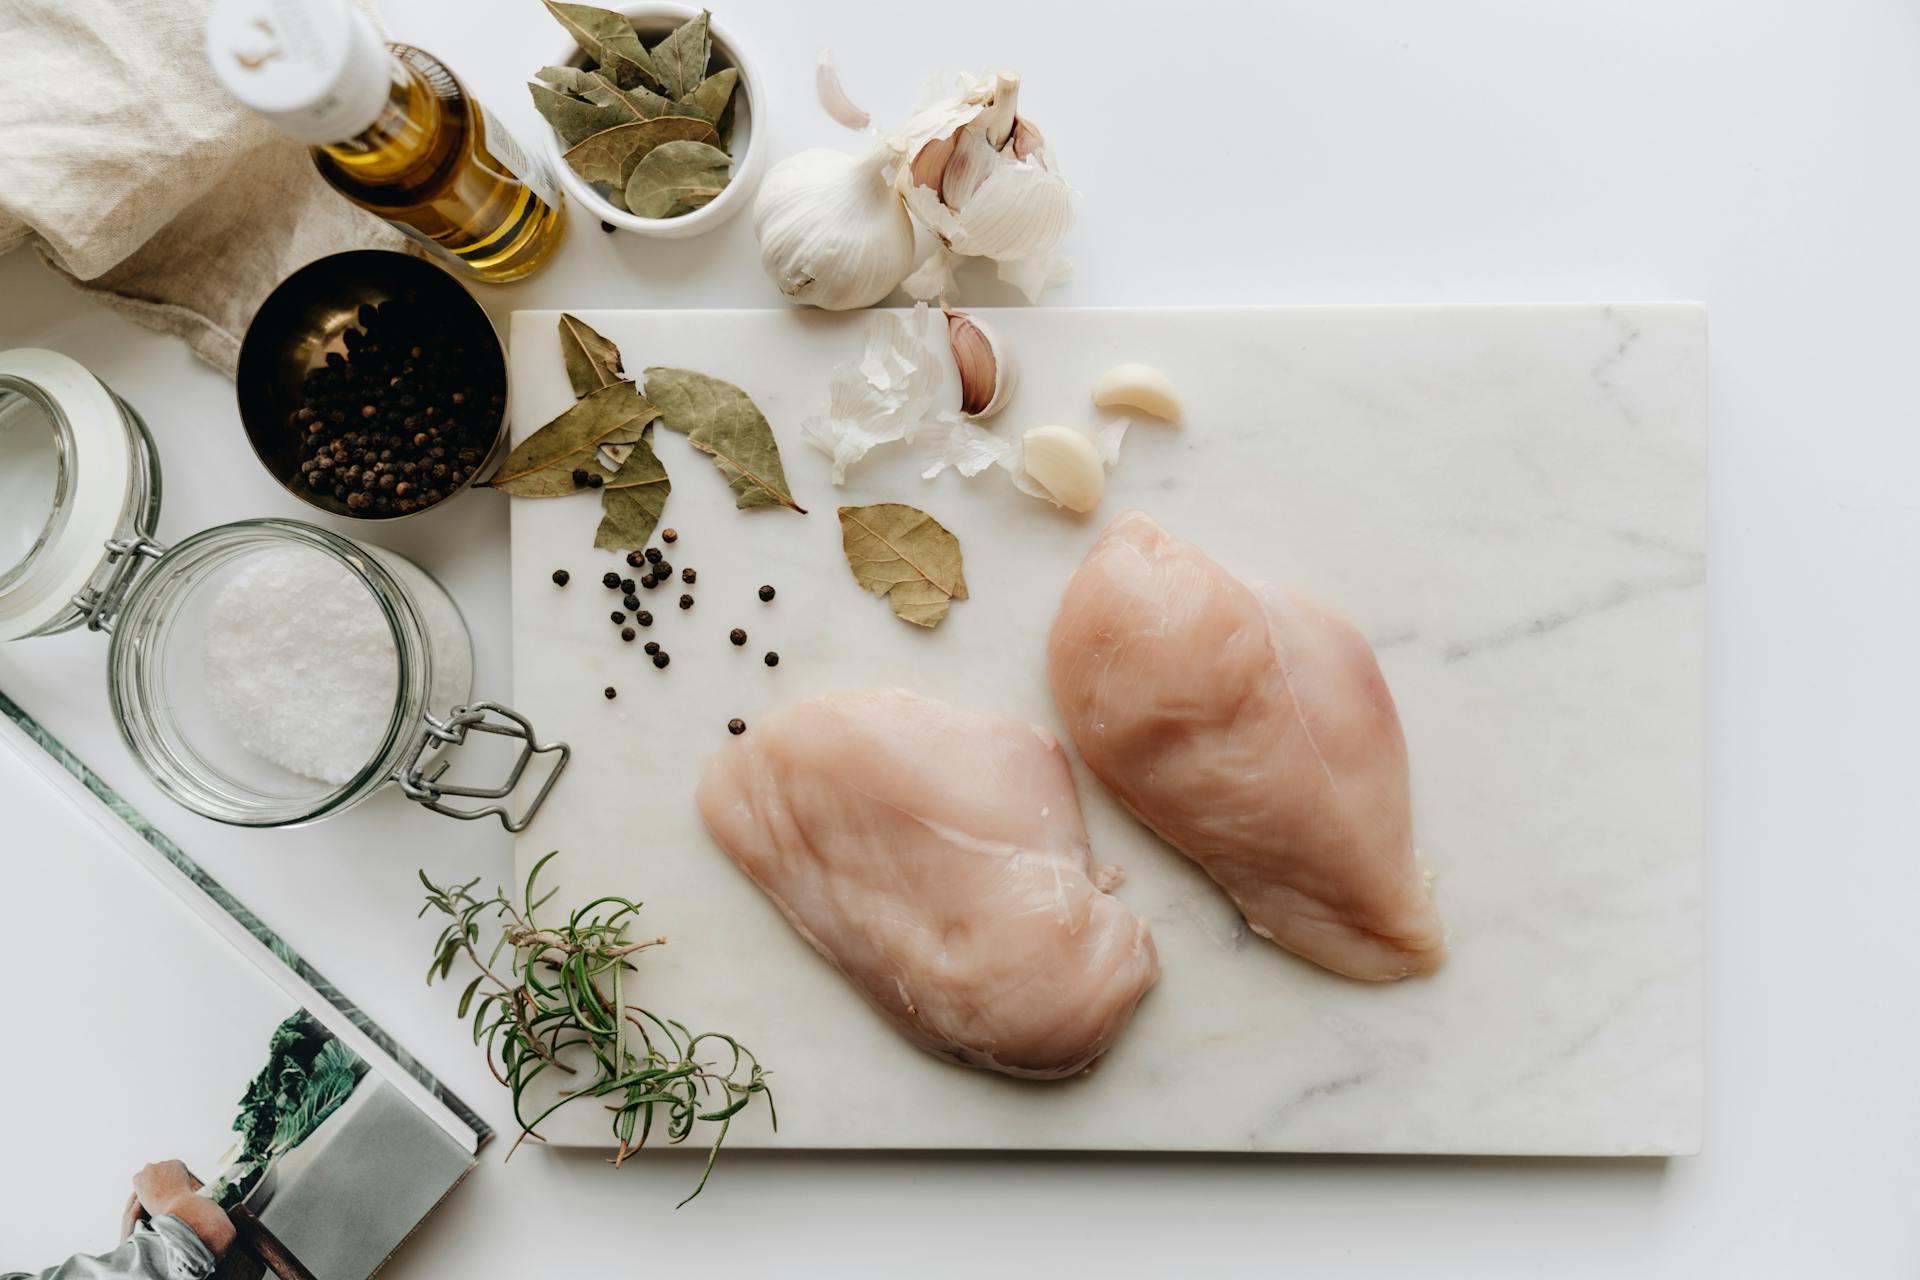 Chicken on a cutting board | Source: Pexels